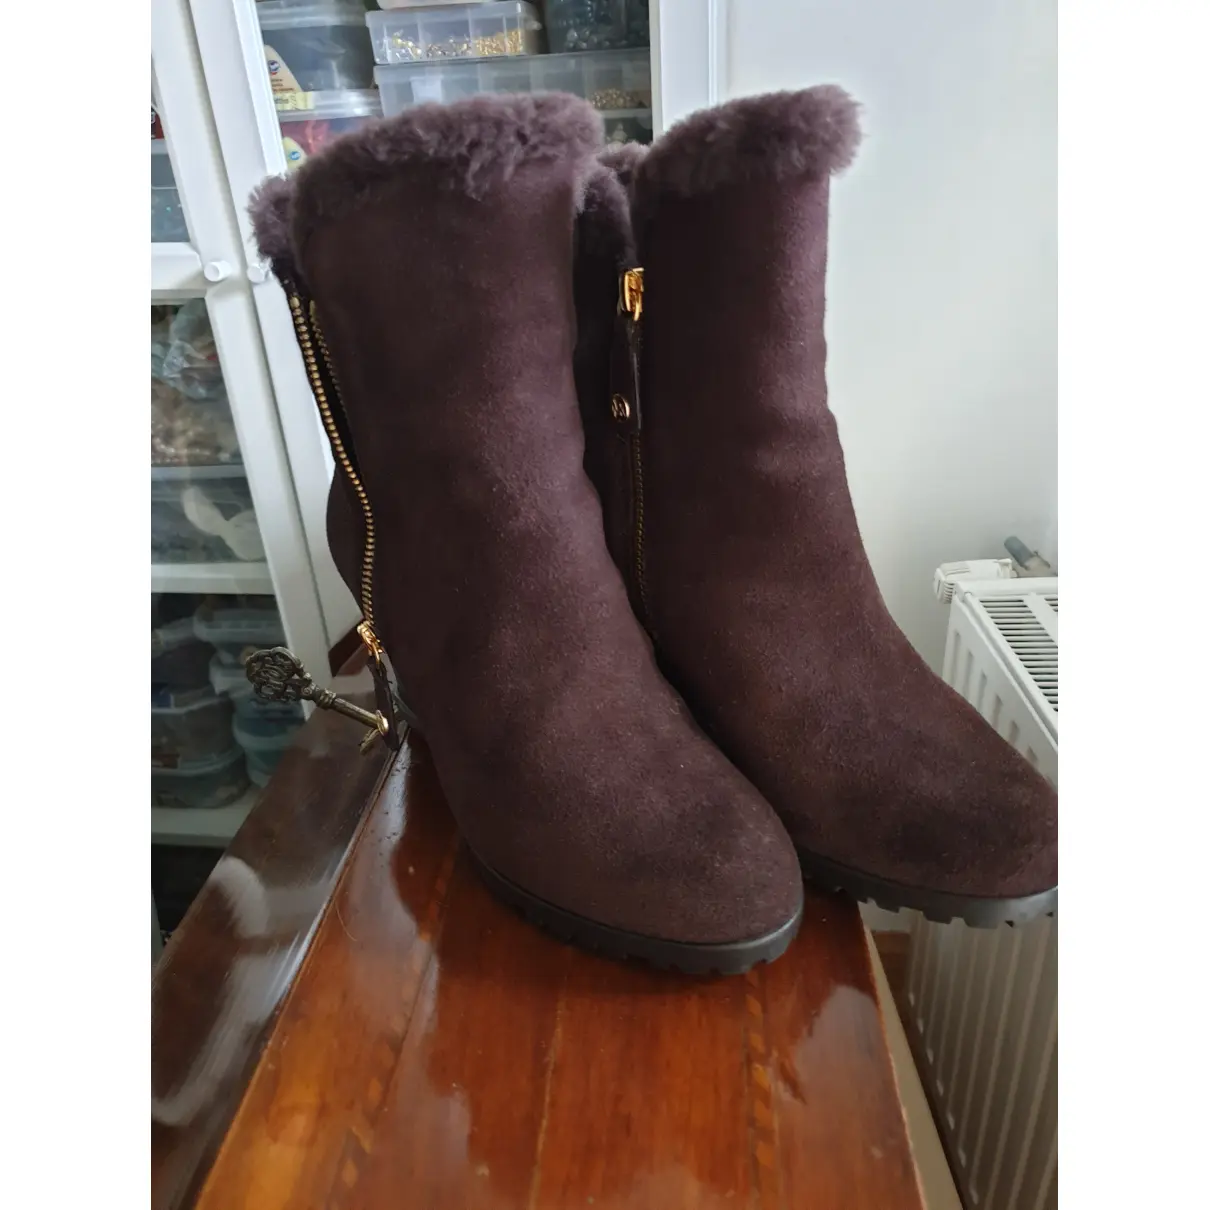 Buy Michael Kors Ankle boots online